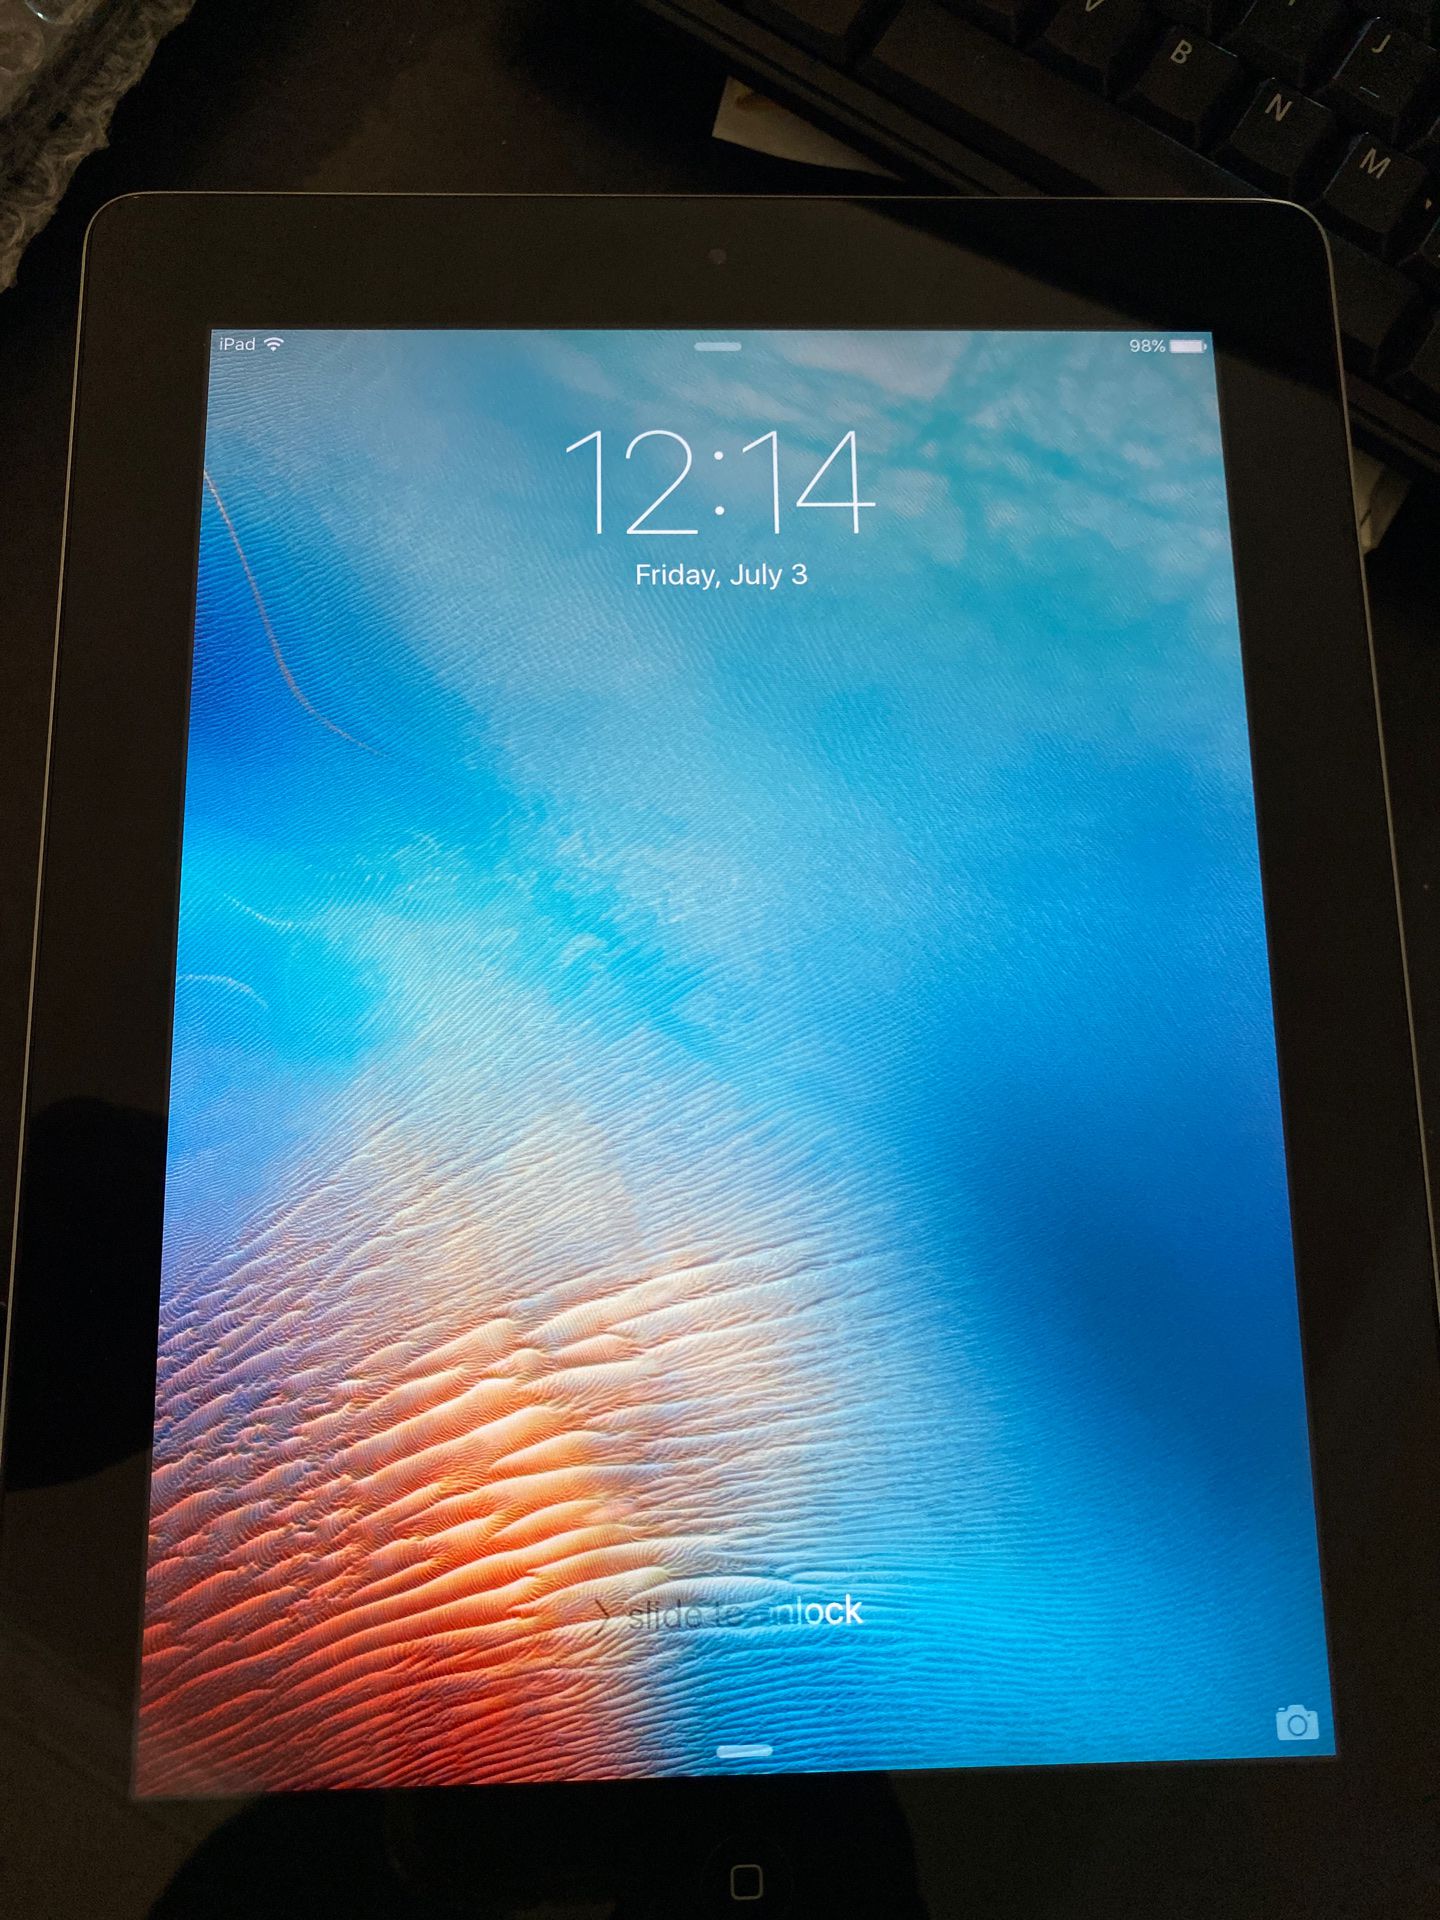 iPad 2 WiFi 16gb in great condition